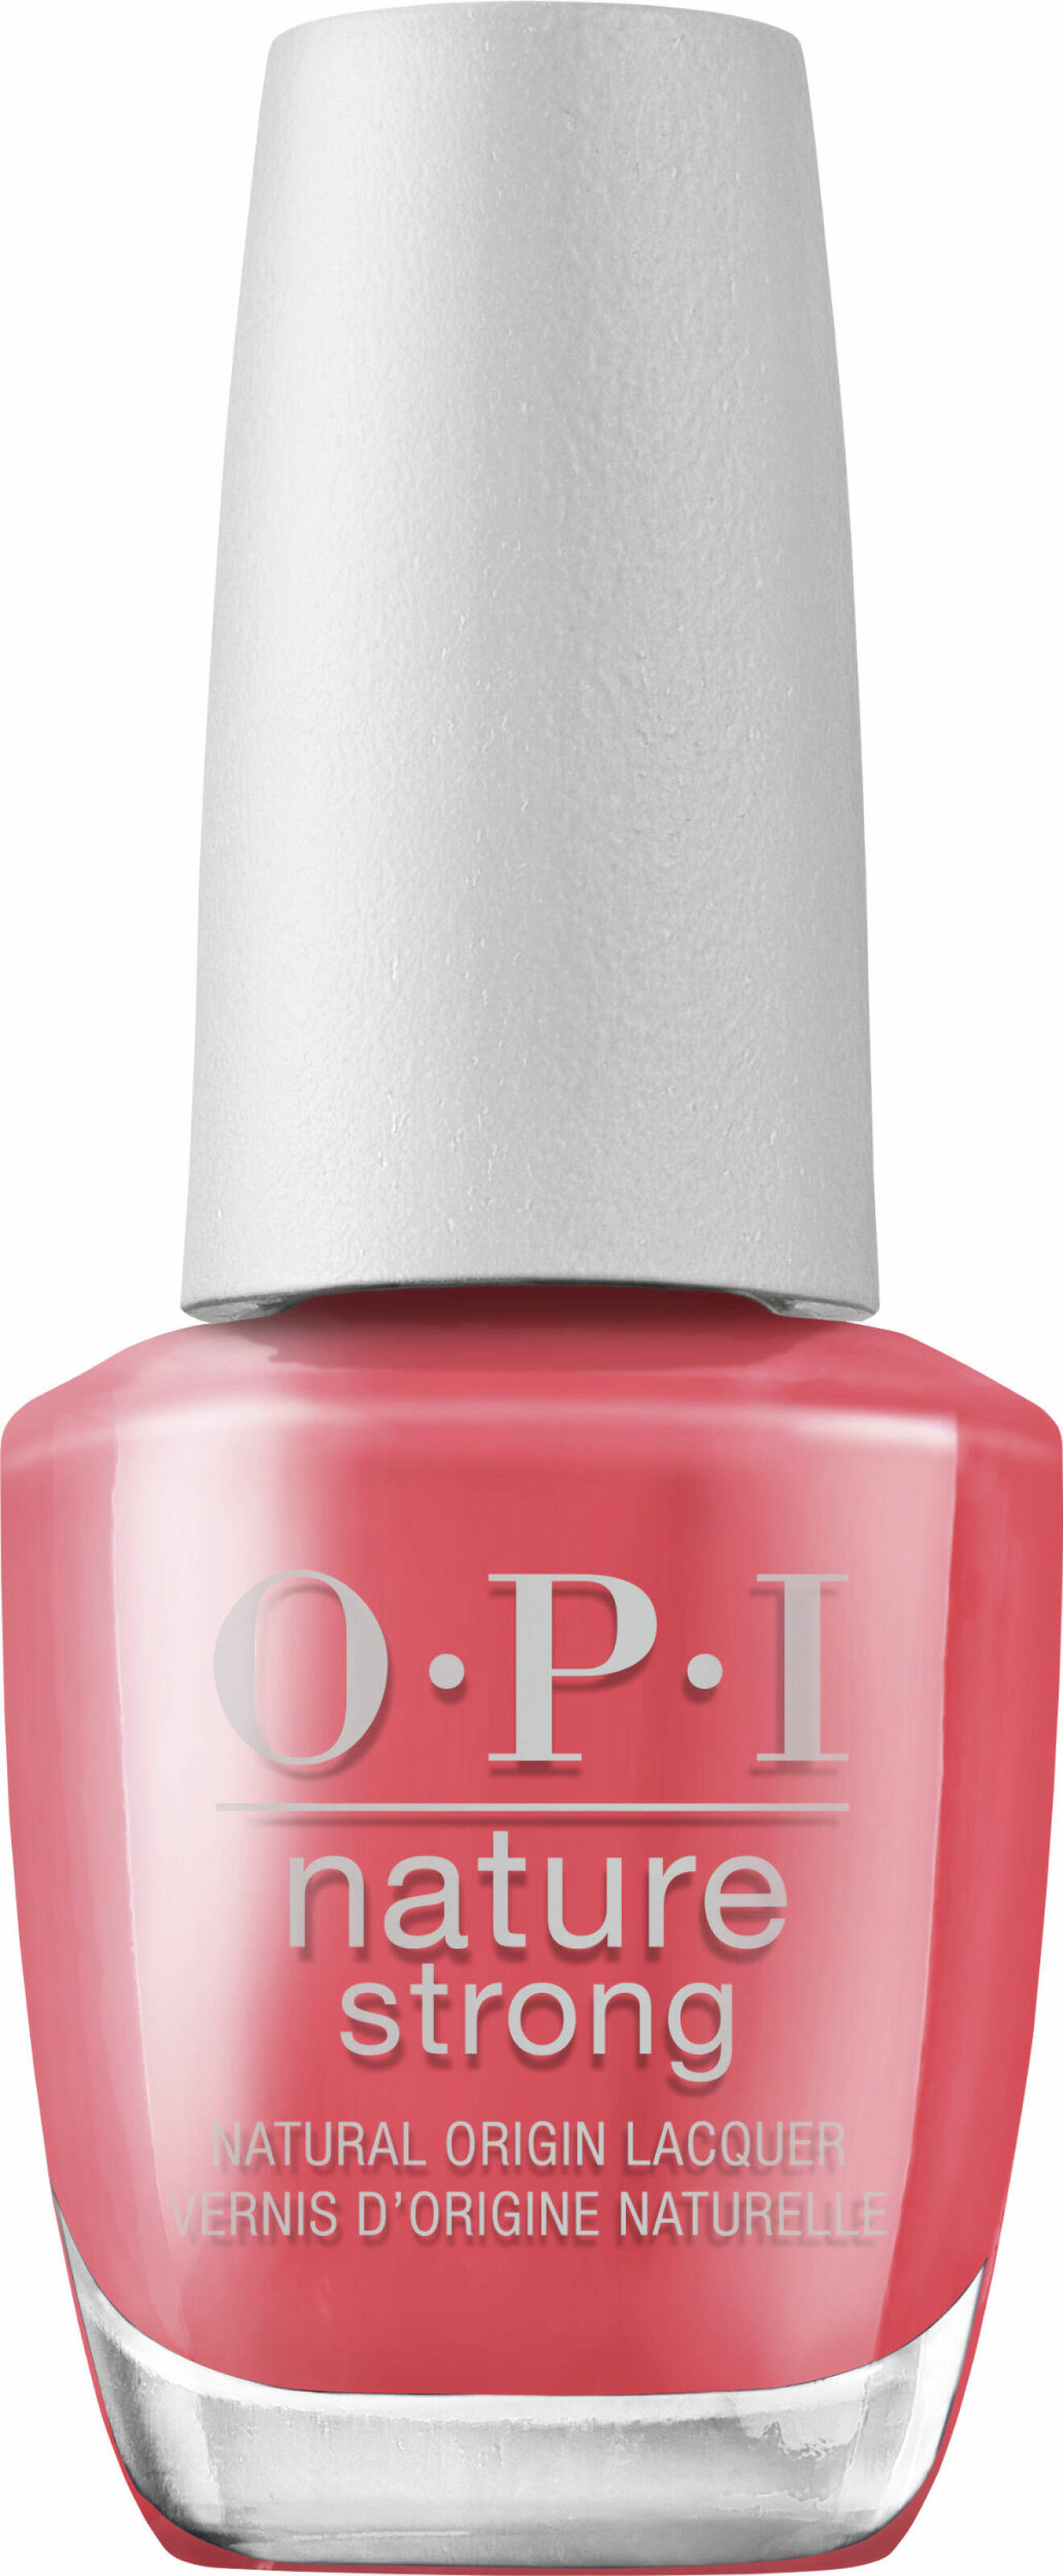 Once and floral Opi.